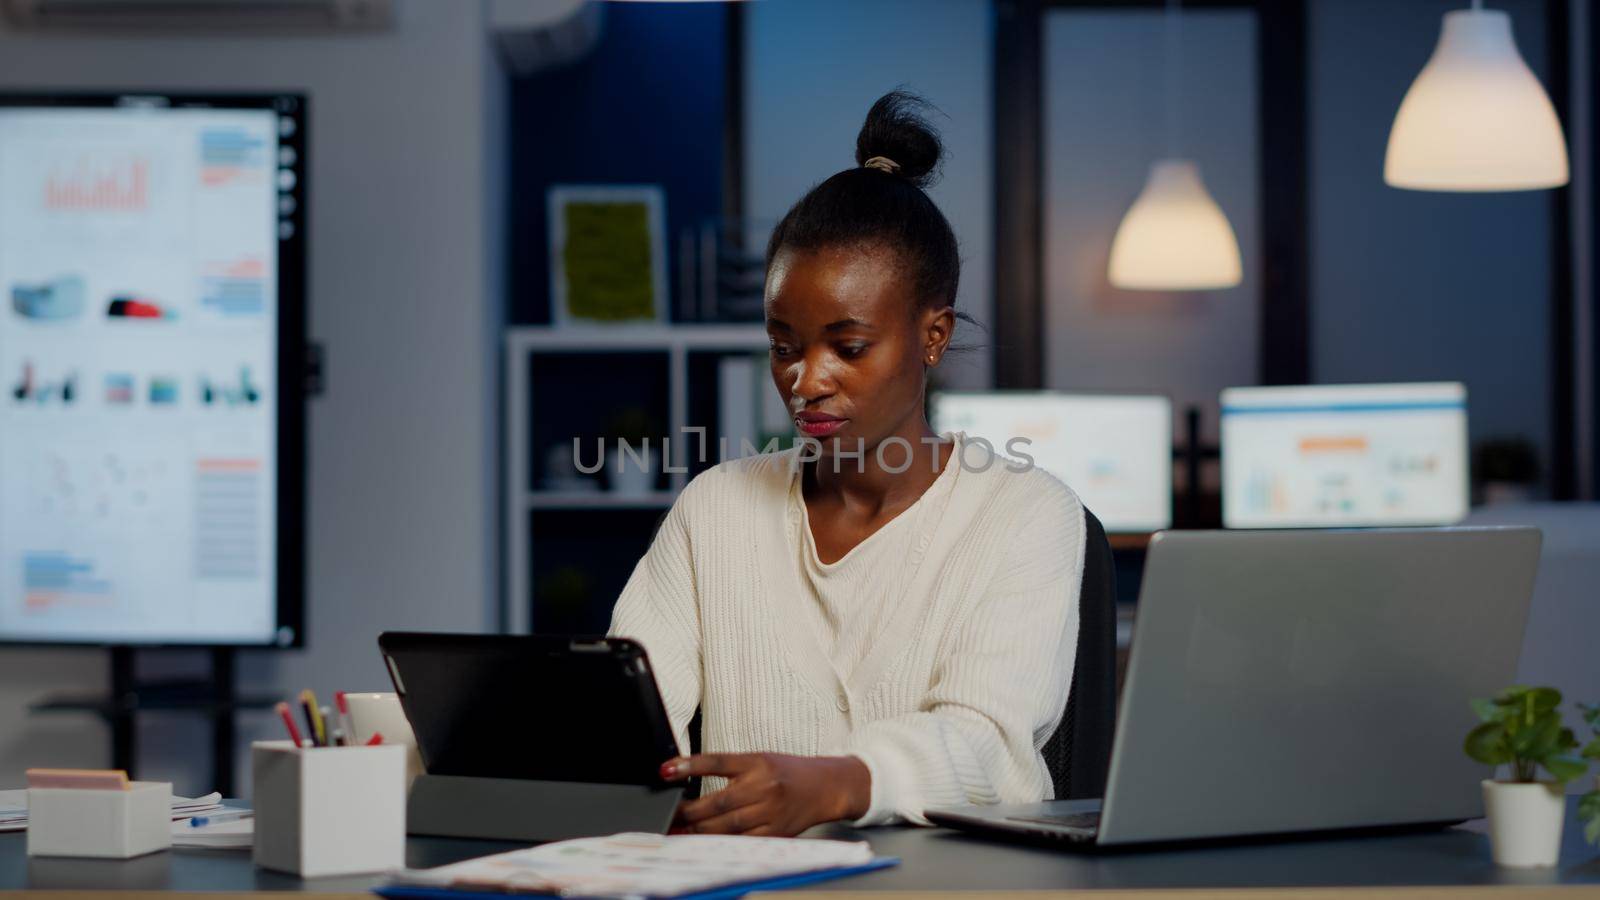 African manager woman using laptop and tablet in same time working overtime in business start-up office. Busy multitasking Busy employee analysing financial statistics overworking writing, searching.